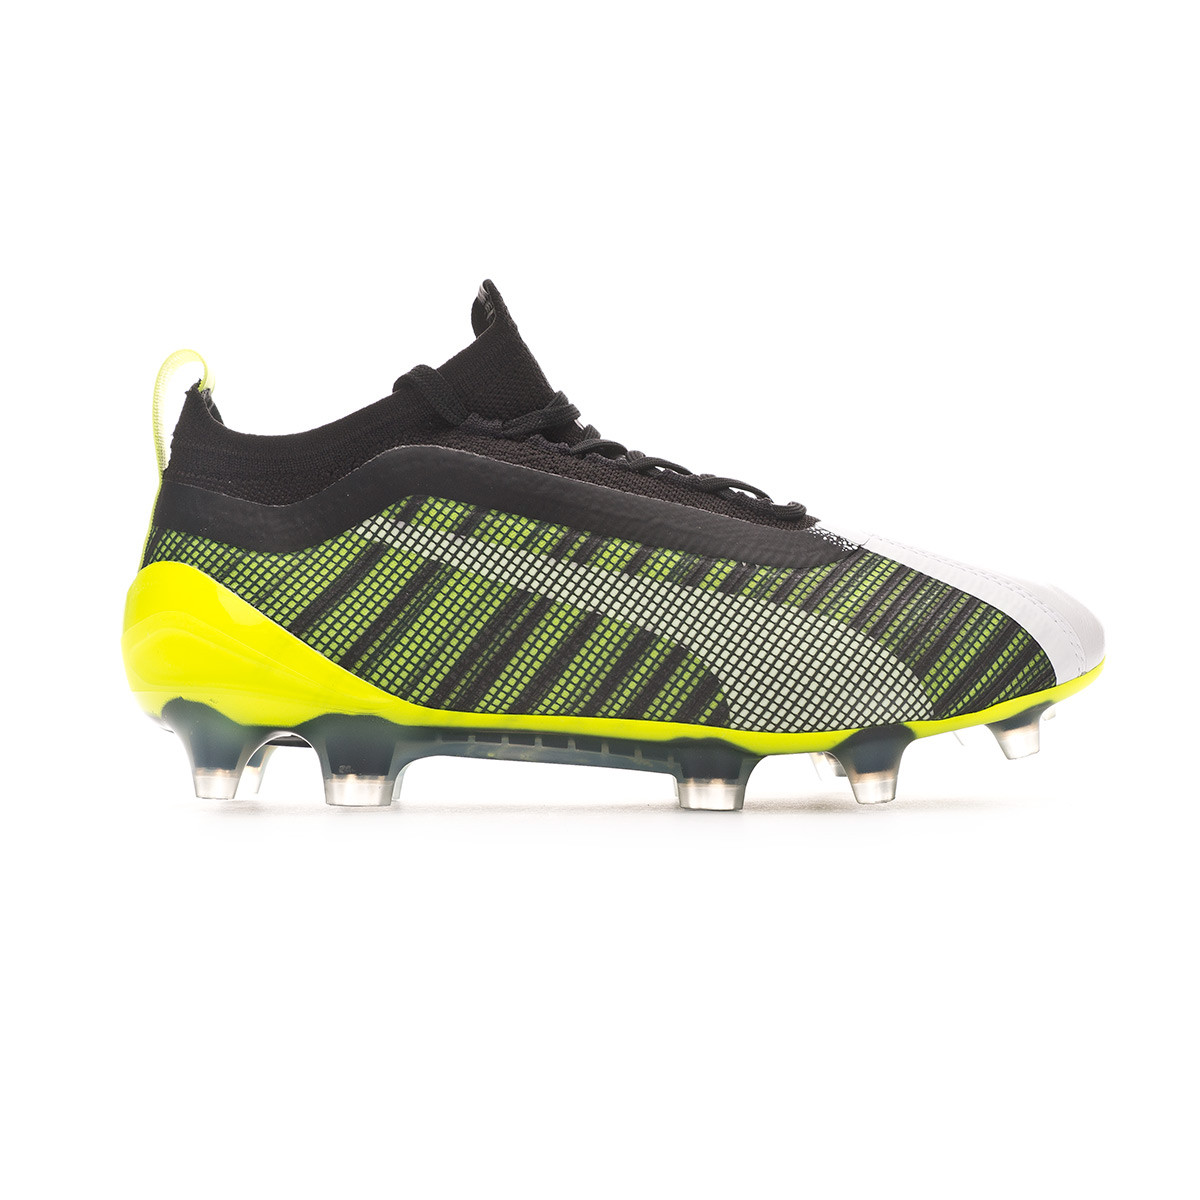 Puma One 5.1 FG Leather Cleat